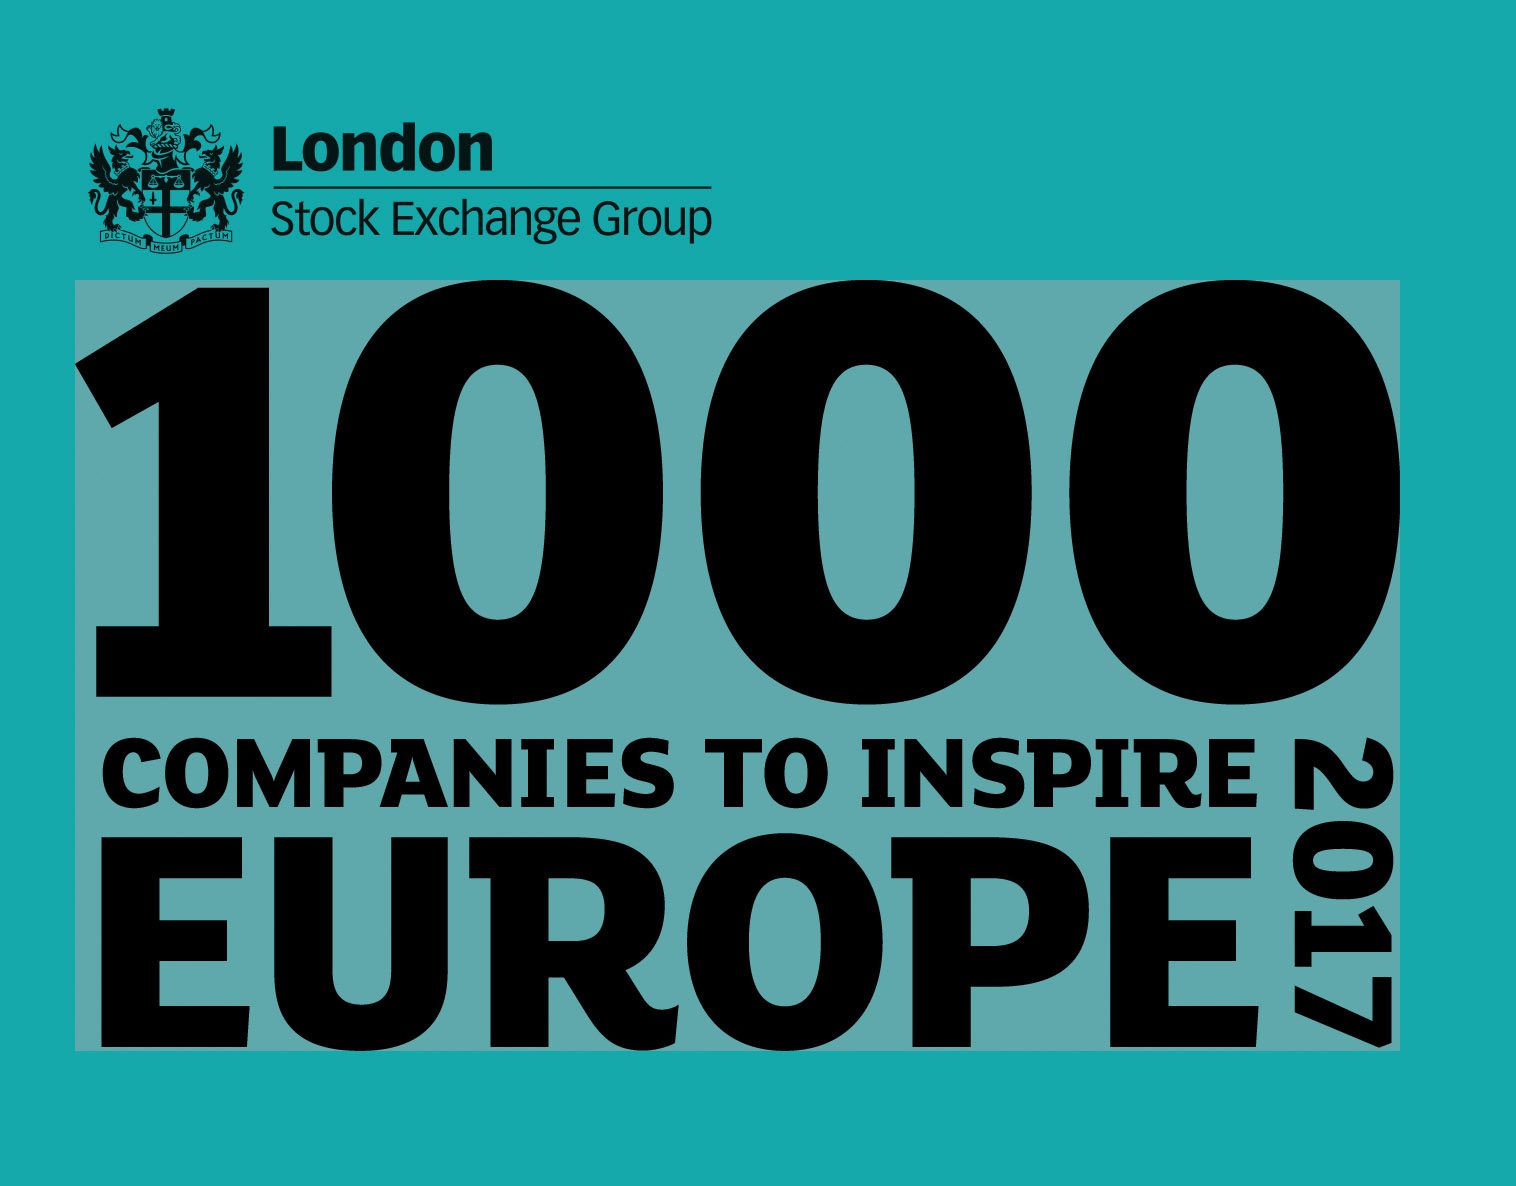 Icomera Named in ‘1000 Companies to Inspire Europe’ Report